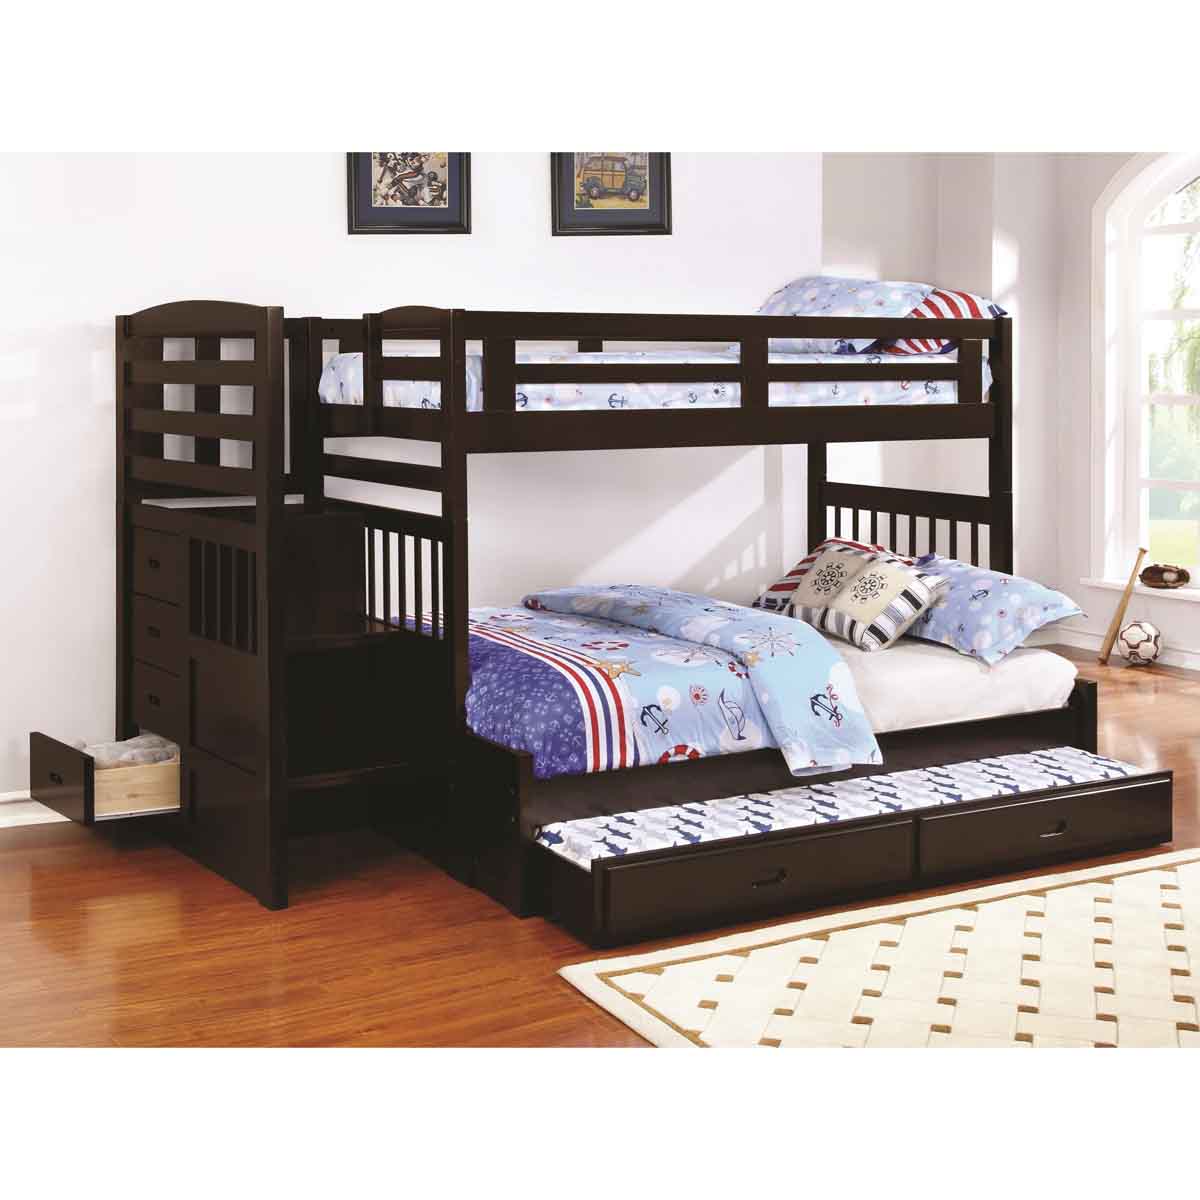 Twin/Full Bunk Bed with trundle